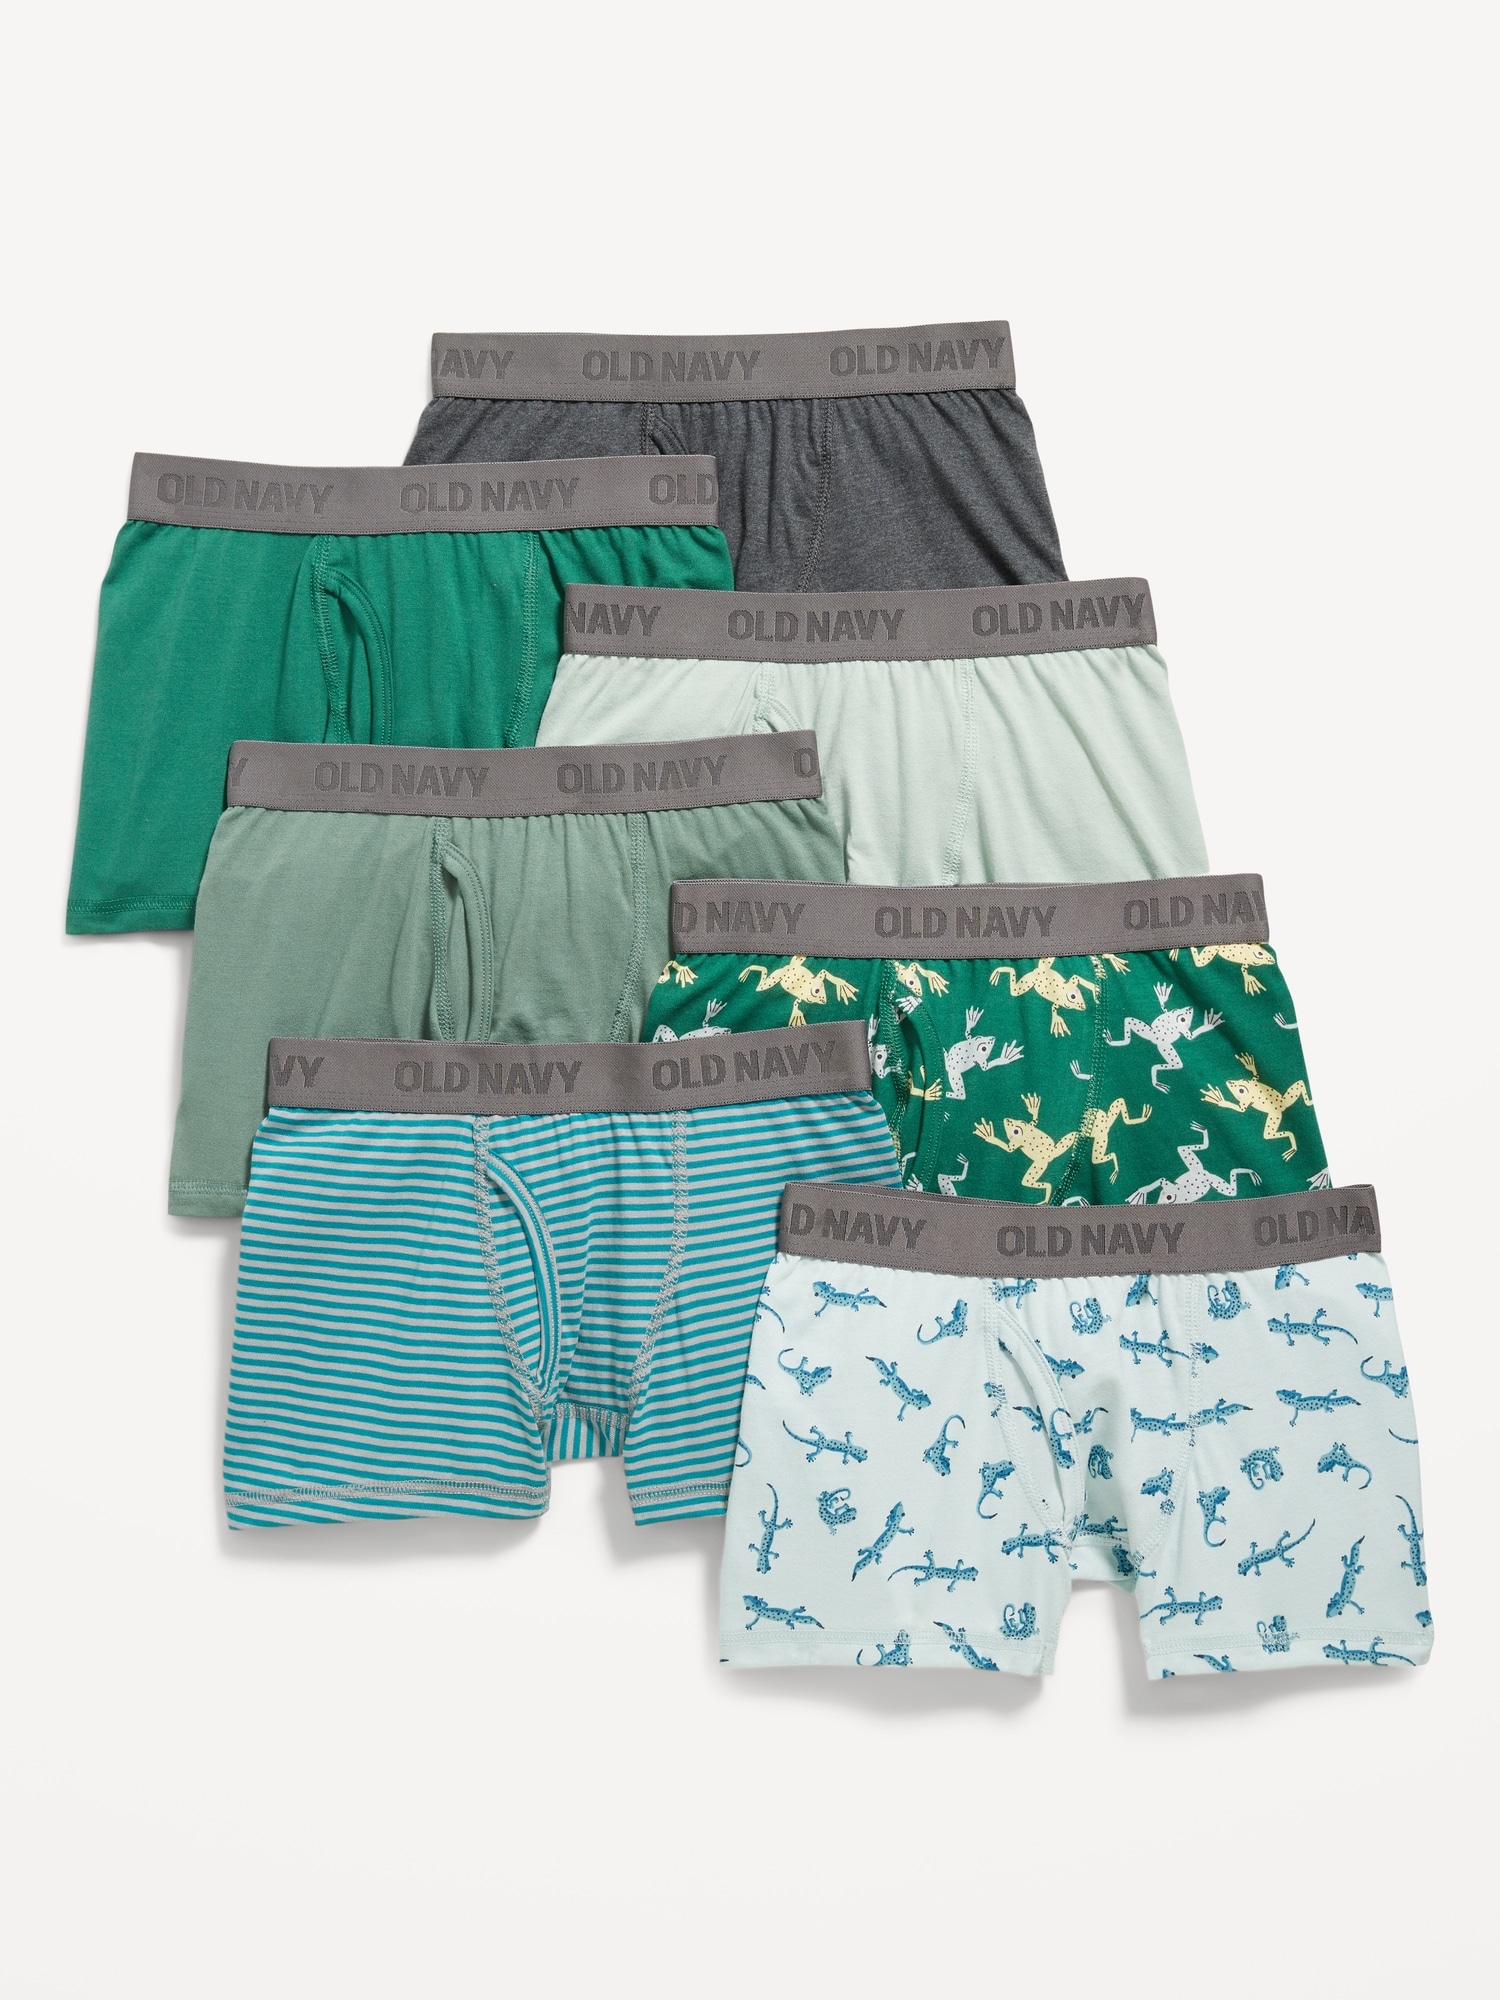 Old Navy Printed Boxer-Briefs Underwear 7-Pack for Boys green. 1